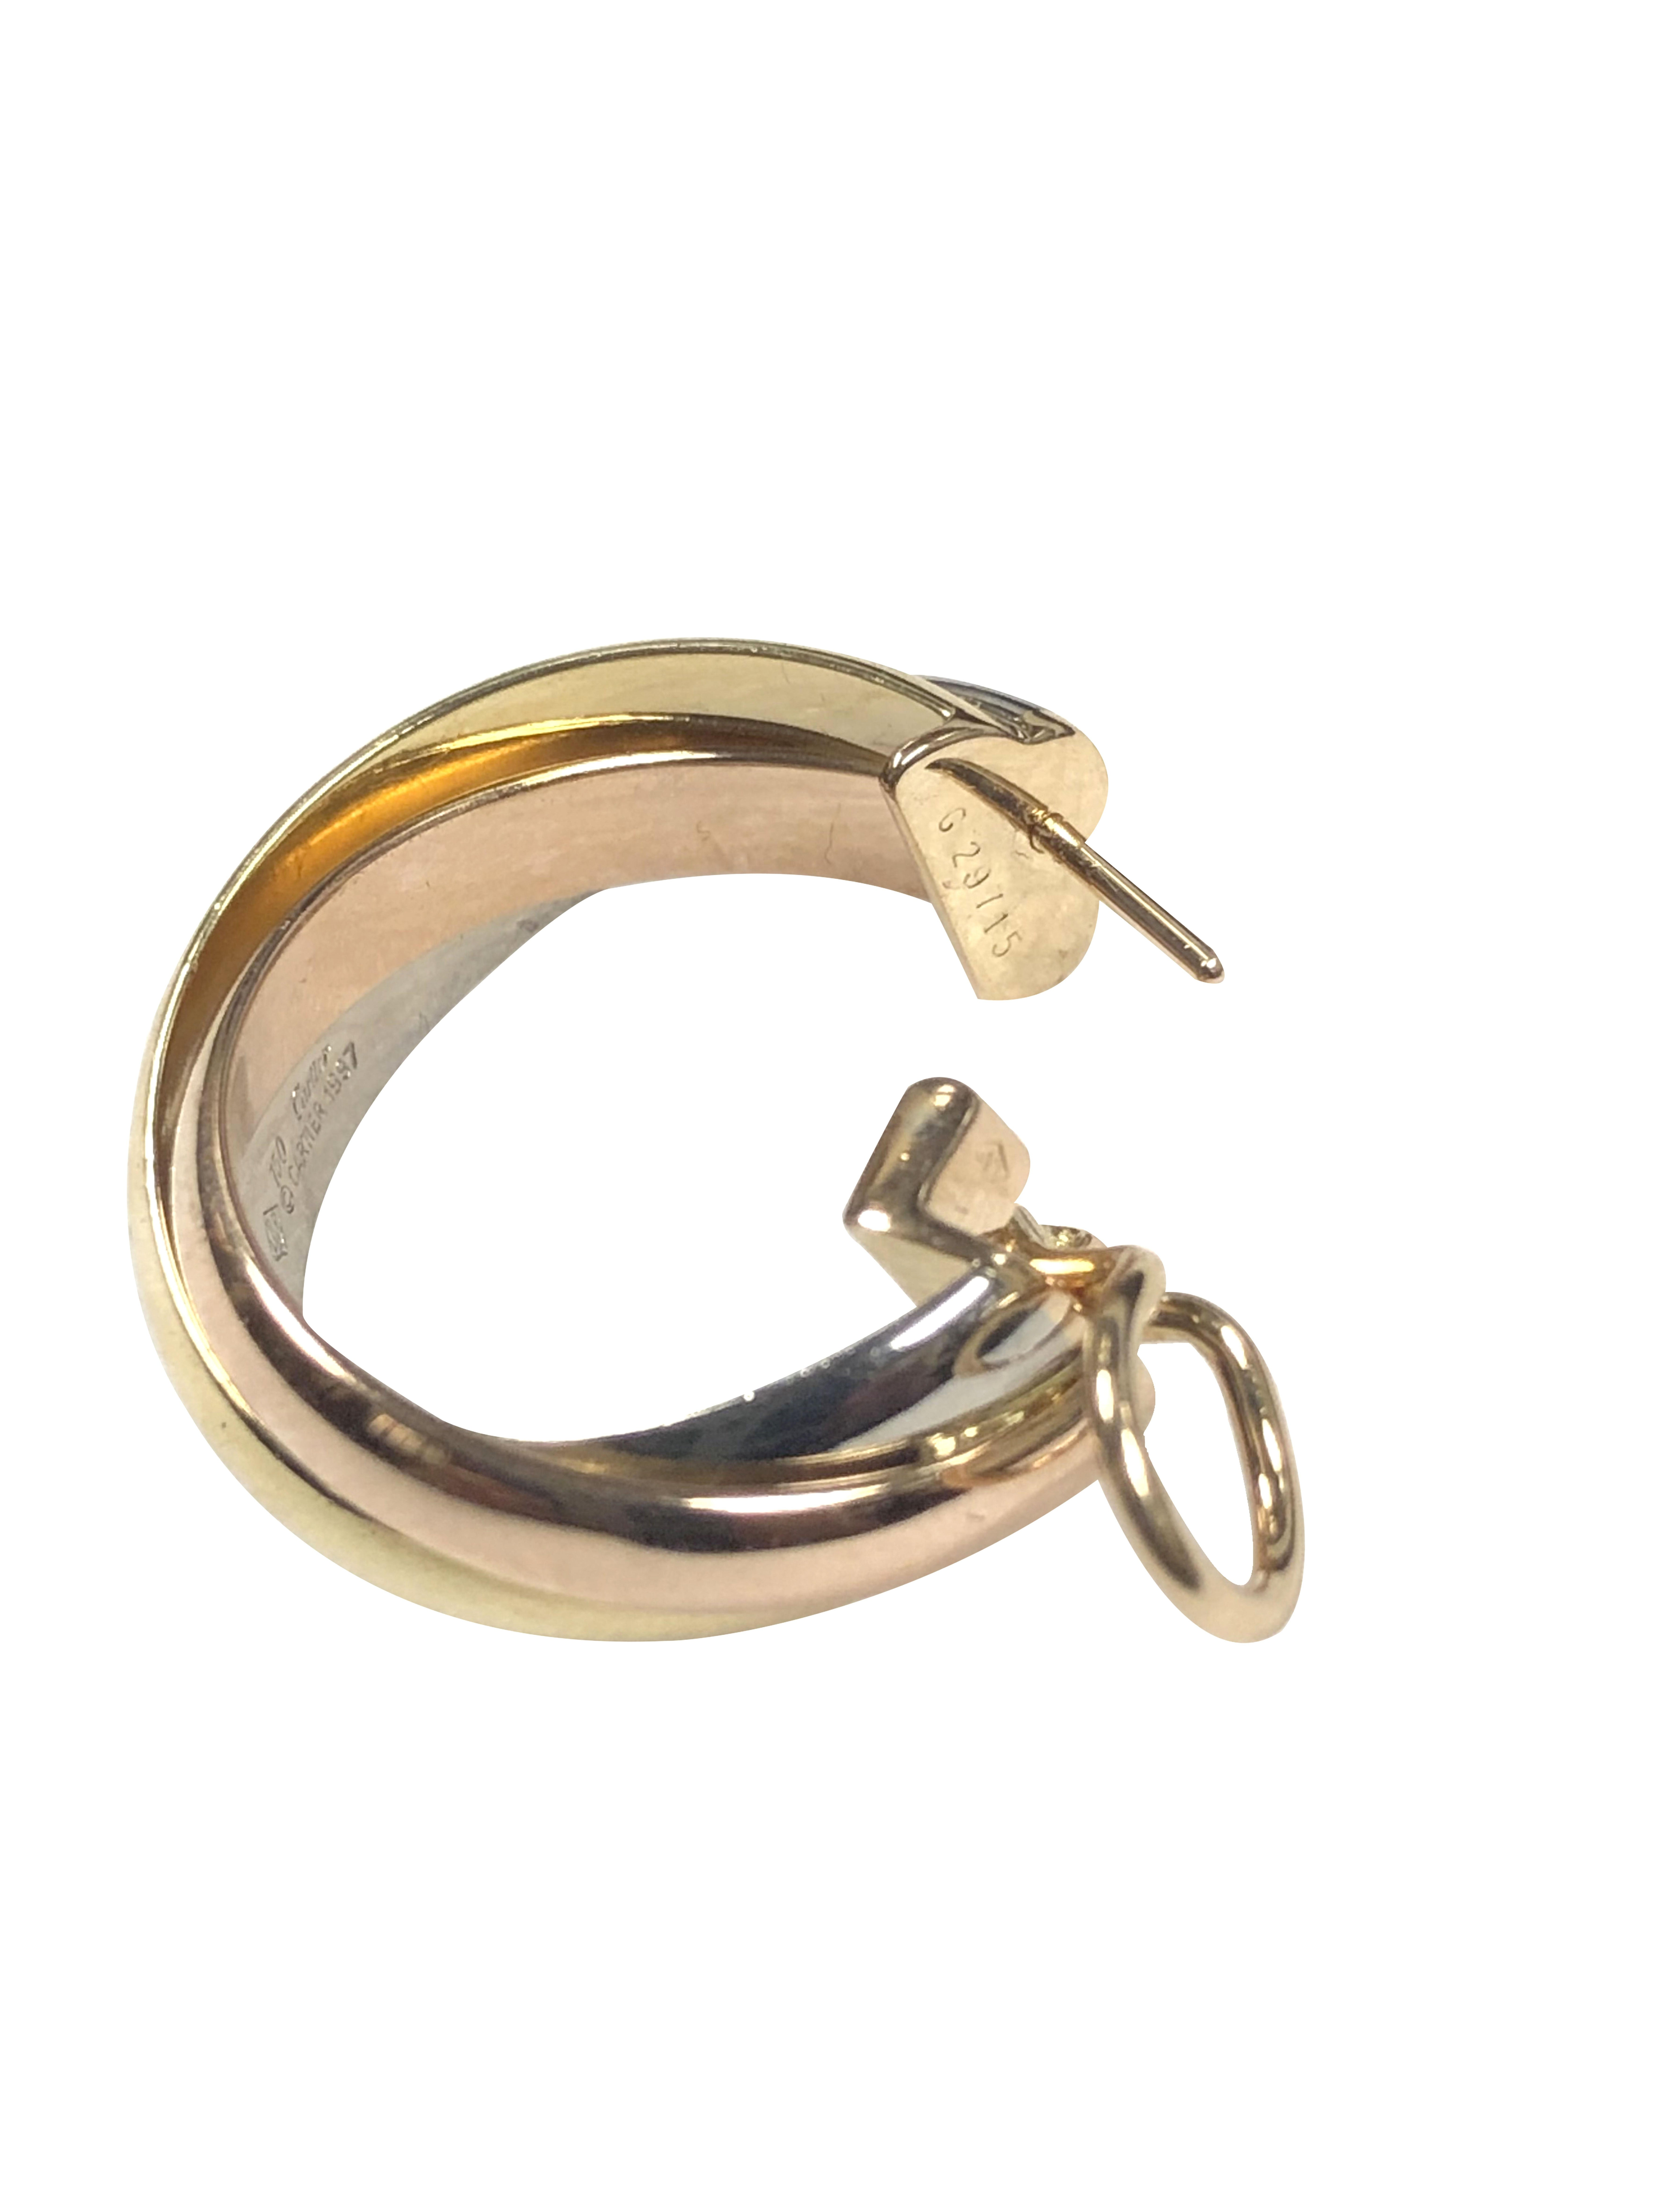 Circa 1990s Cartier Trinity Tri Color, 18K Rose, Yellow and White Gold Hoop Earrings, these are the Medium size earrings measuring 3/4 inch in length and 7/8 inch in Diameter. having Omega backs with a Post.